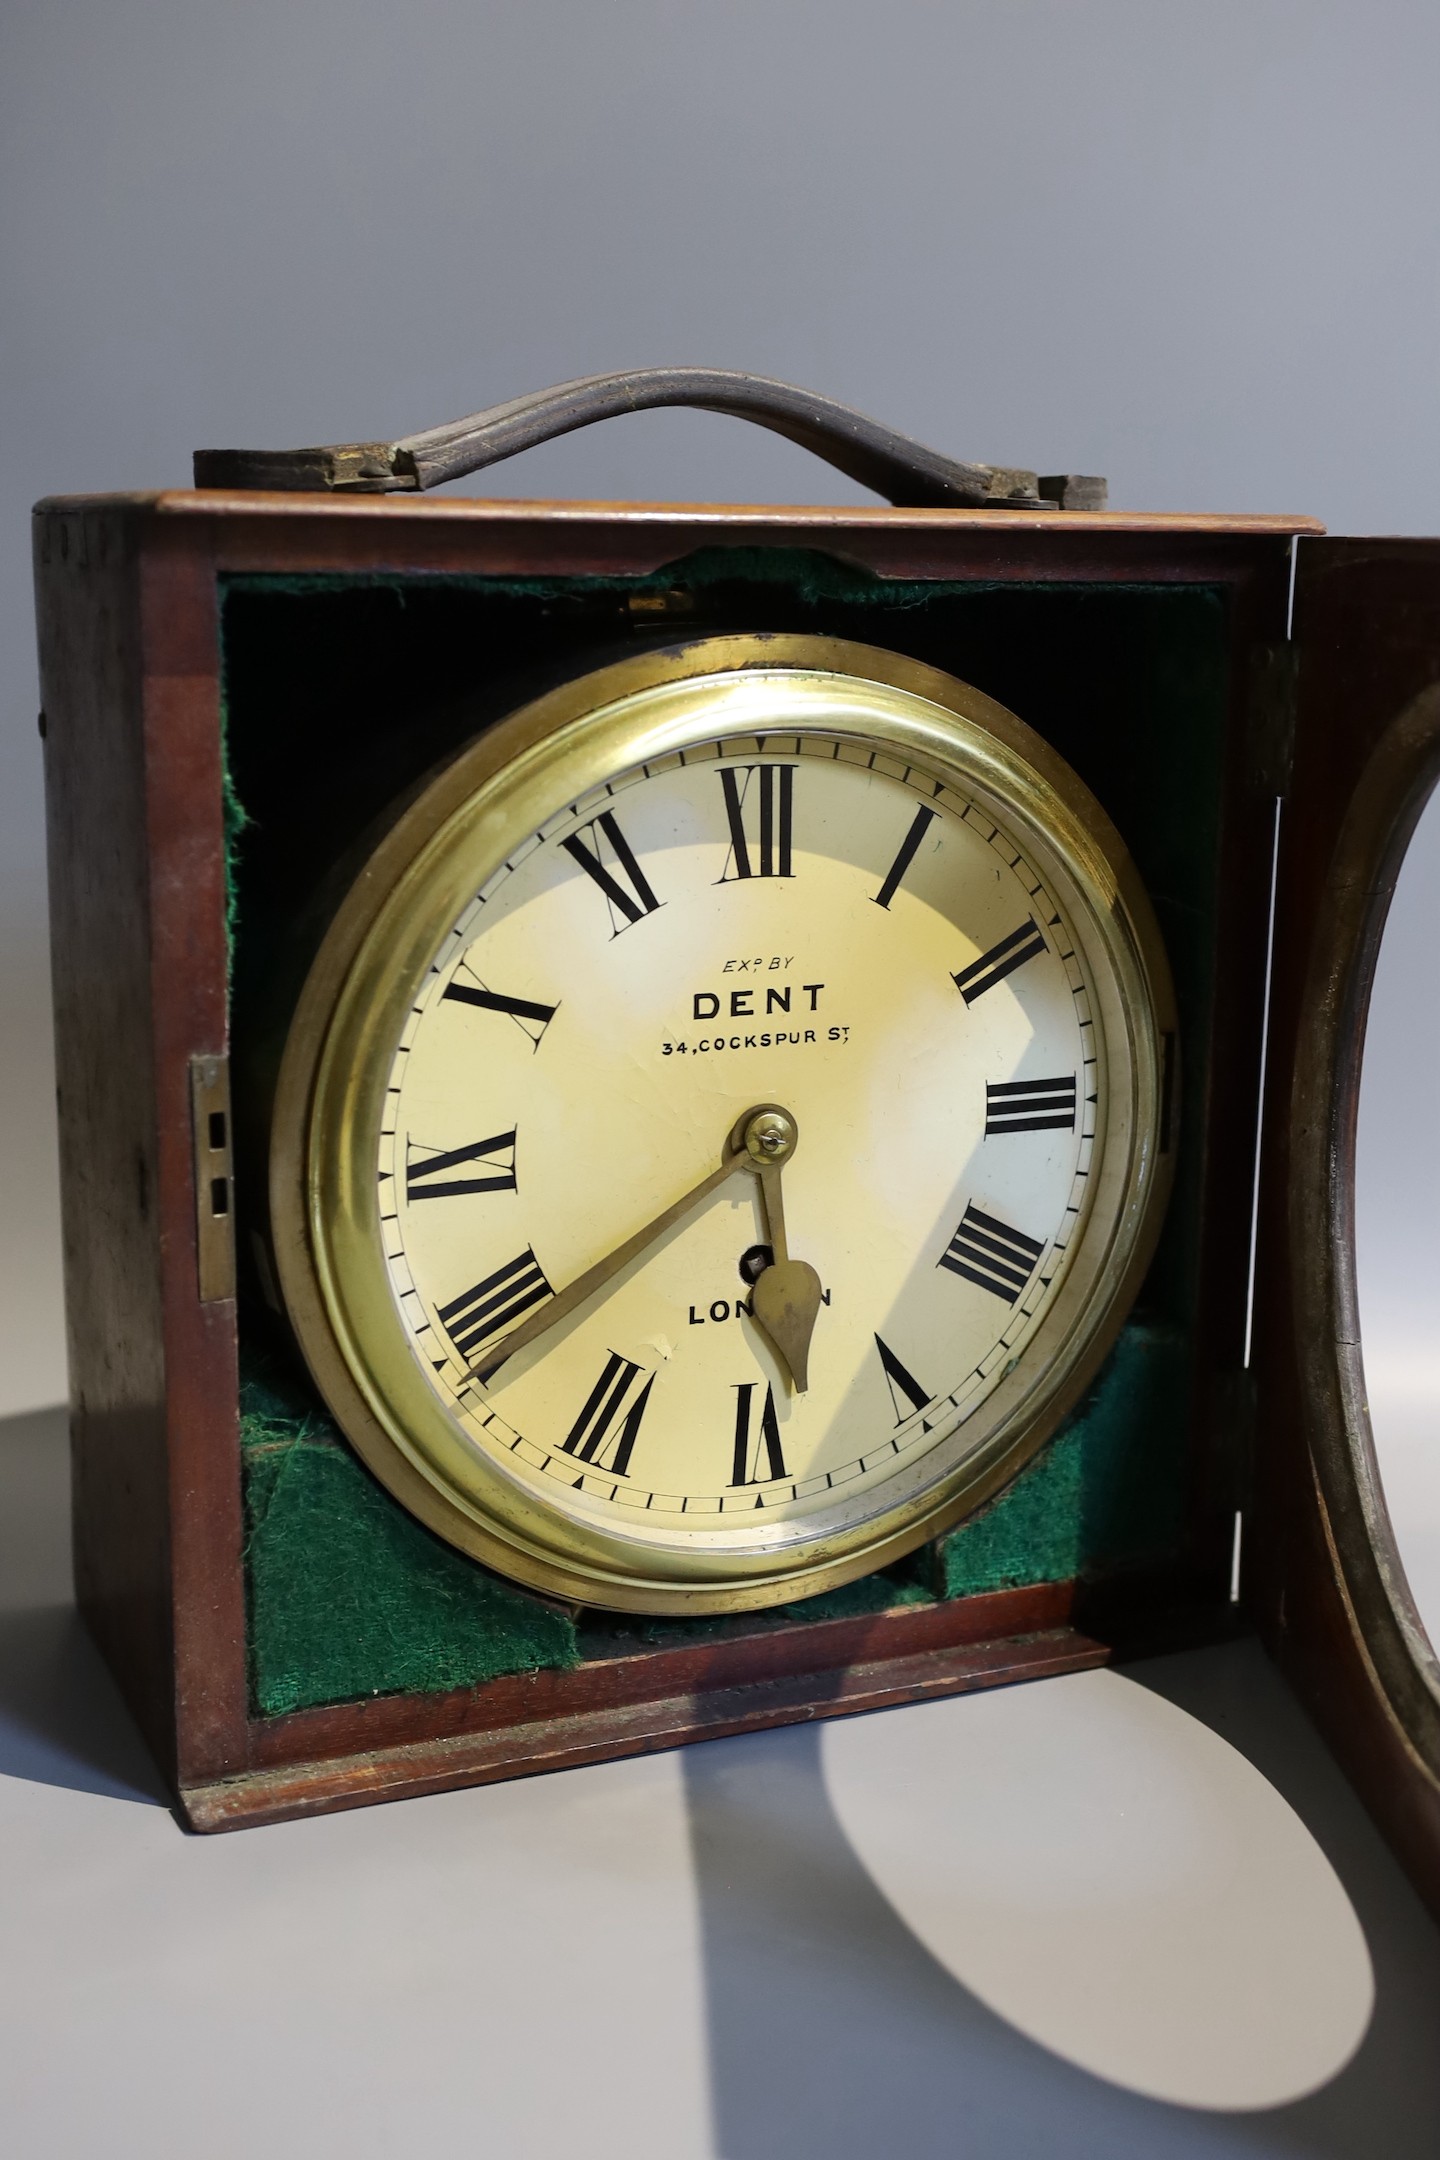 A 19th century mahogany cased circular lacquered brass travelling timepiece marked Dent London, case width 28 cms.